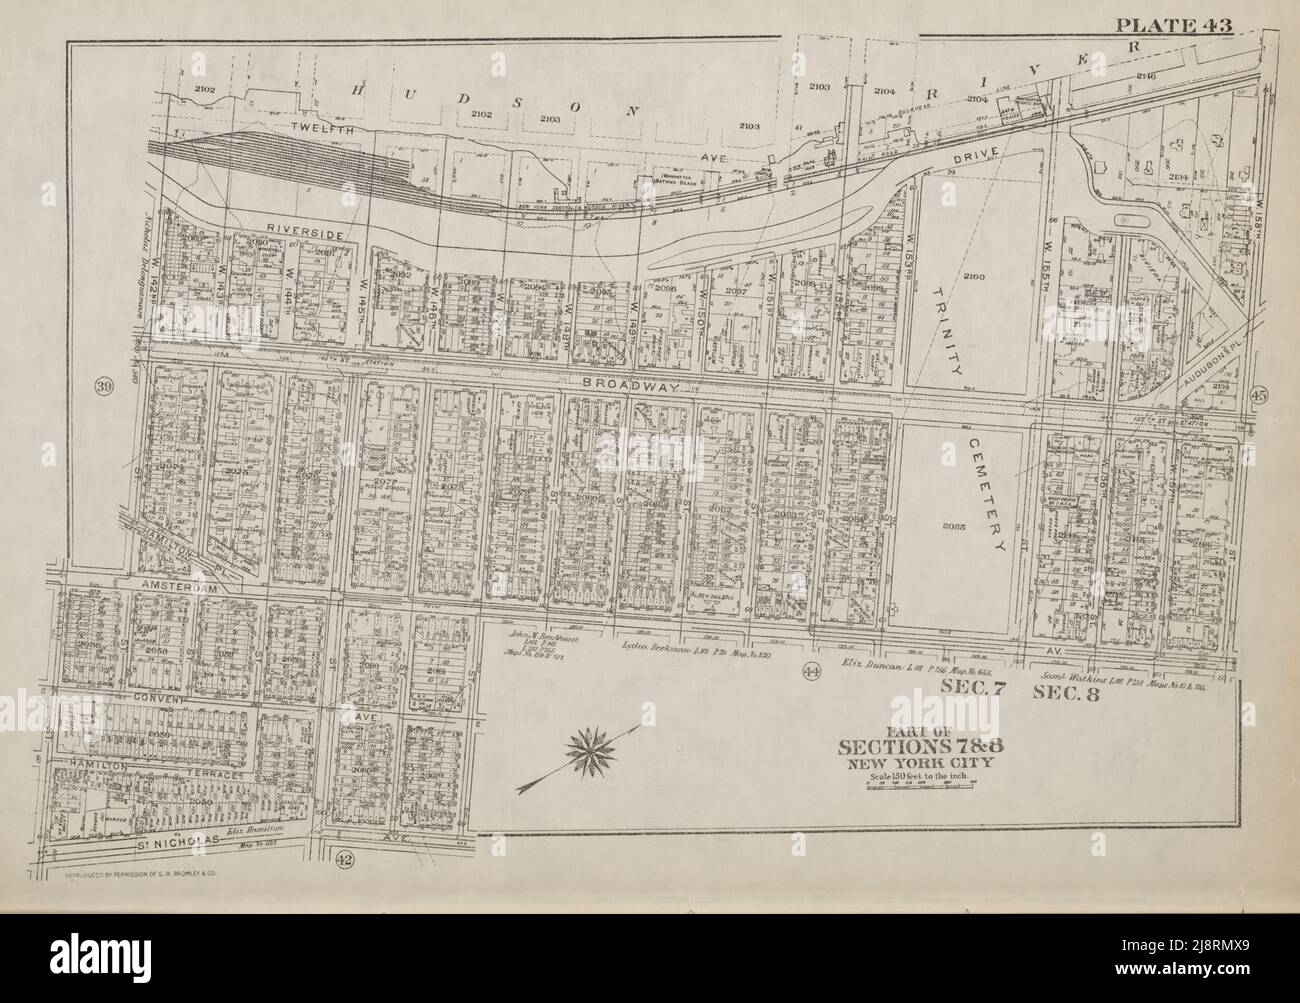 Old Historical Maps of Long Branch, NJ